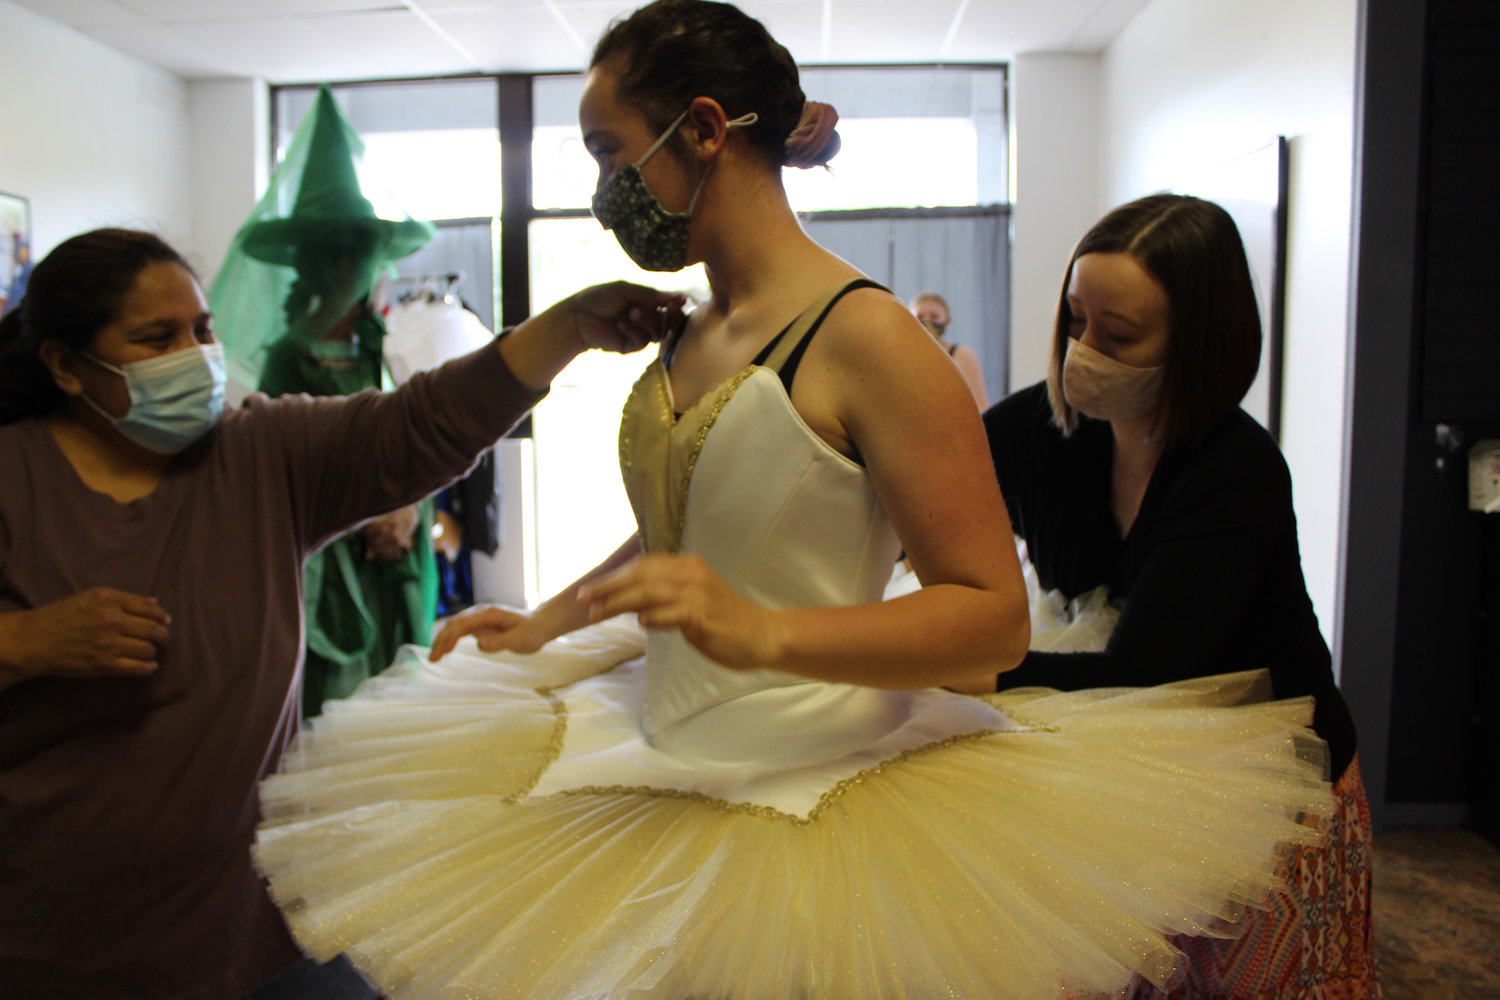 Marisol Williams and Emily Smith work together to fit one of the newly created pancake tutus on Brooke Larson, 16, who will dance the part of the Gold Jewel Fairy in "Sleeping Beauty Act III - Aurora's Wedding Tea" on May 16 and June 5.